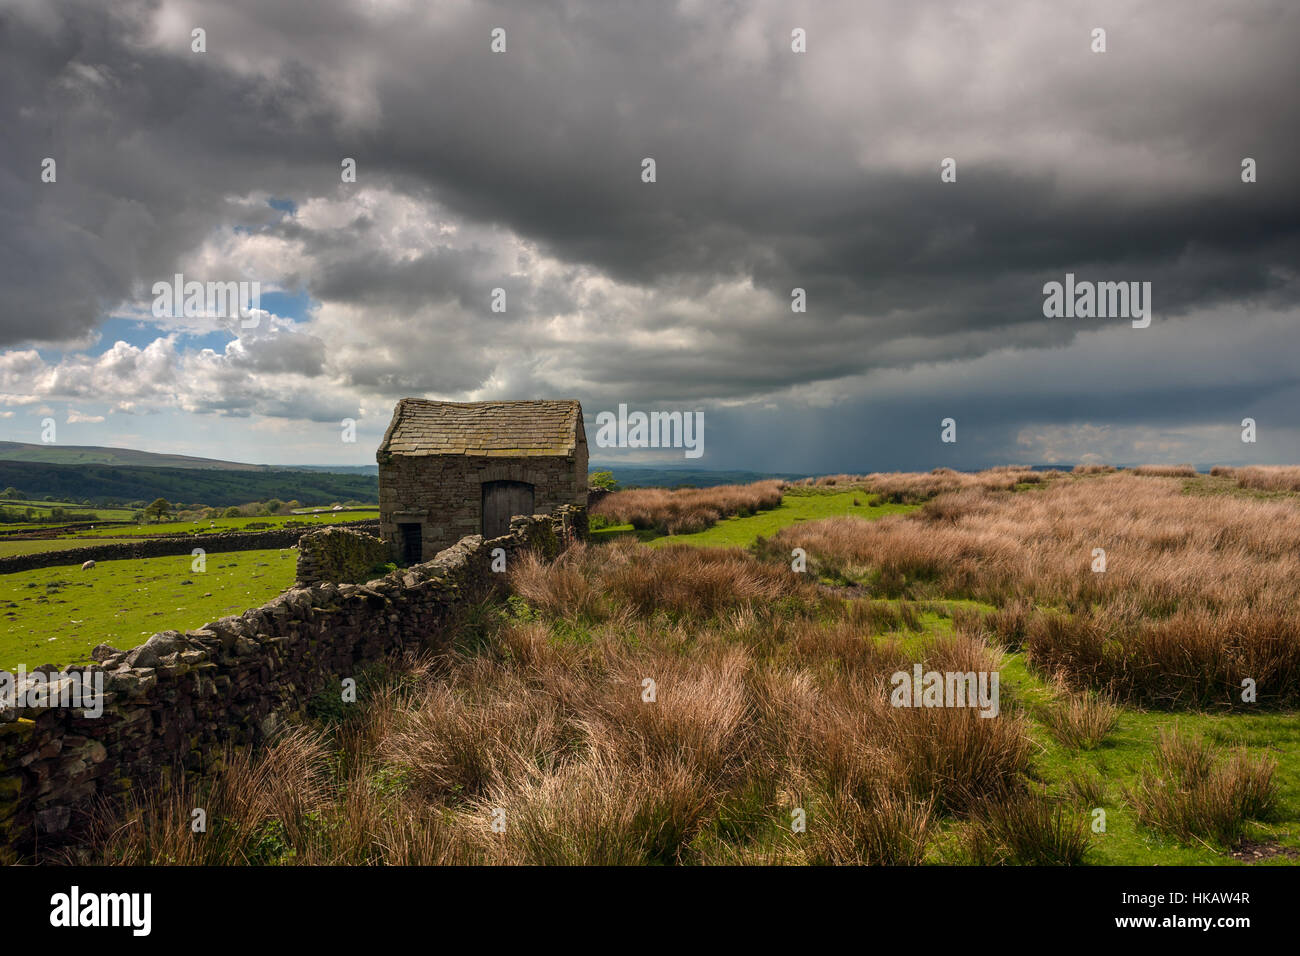 Barn at Lanshaw in The Forest of Bowland Stock Photo